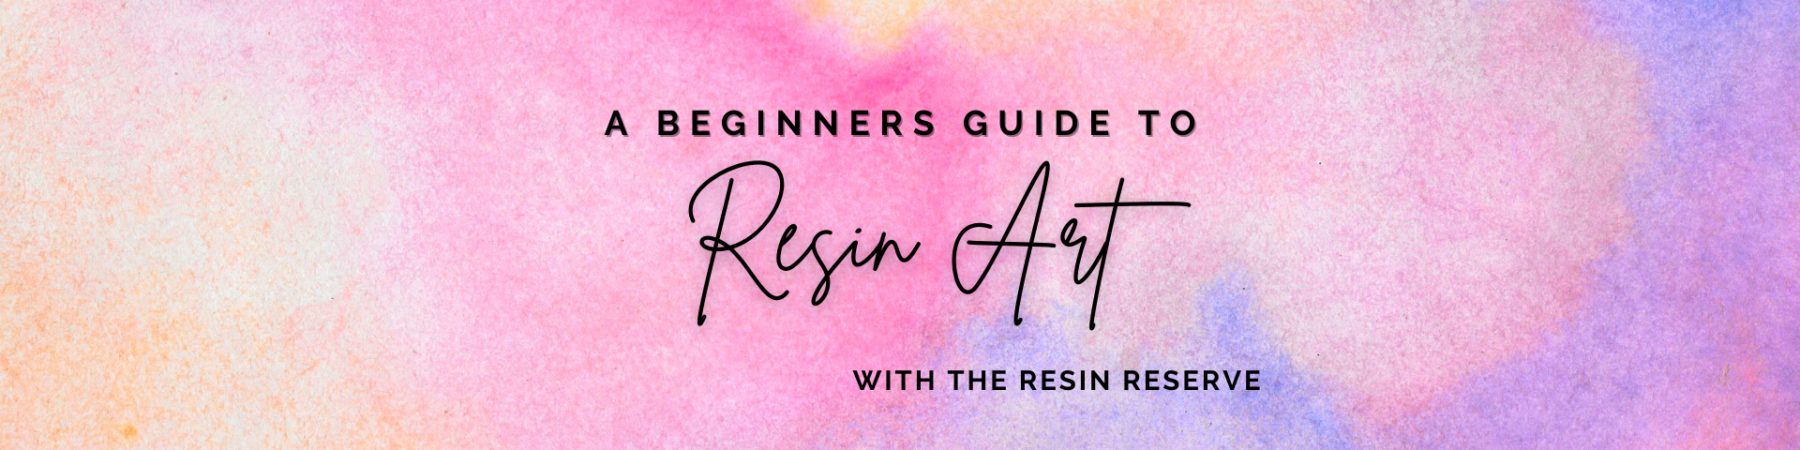 A Beginner’s Guide to Resin Art – With The Resin Reserve